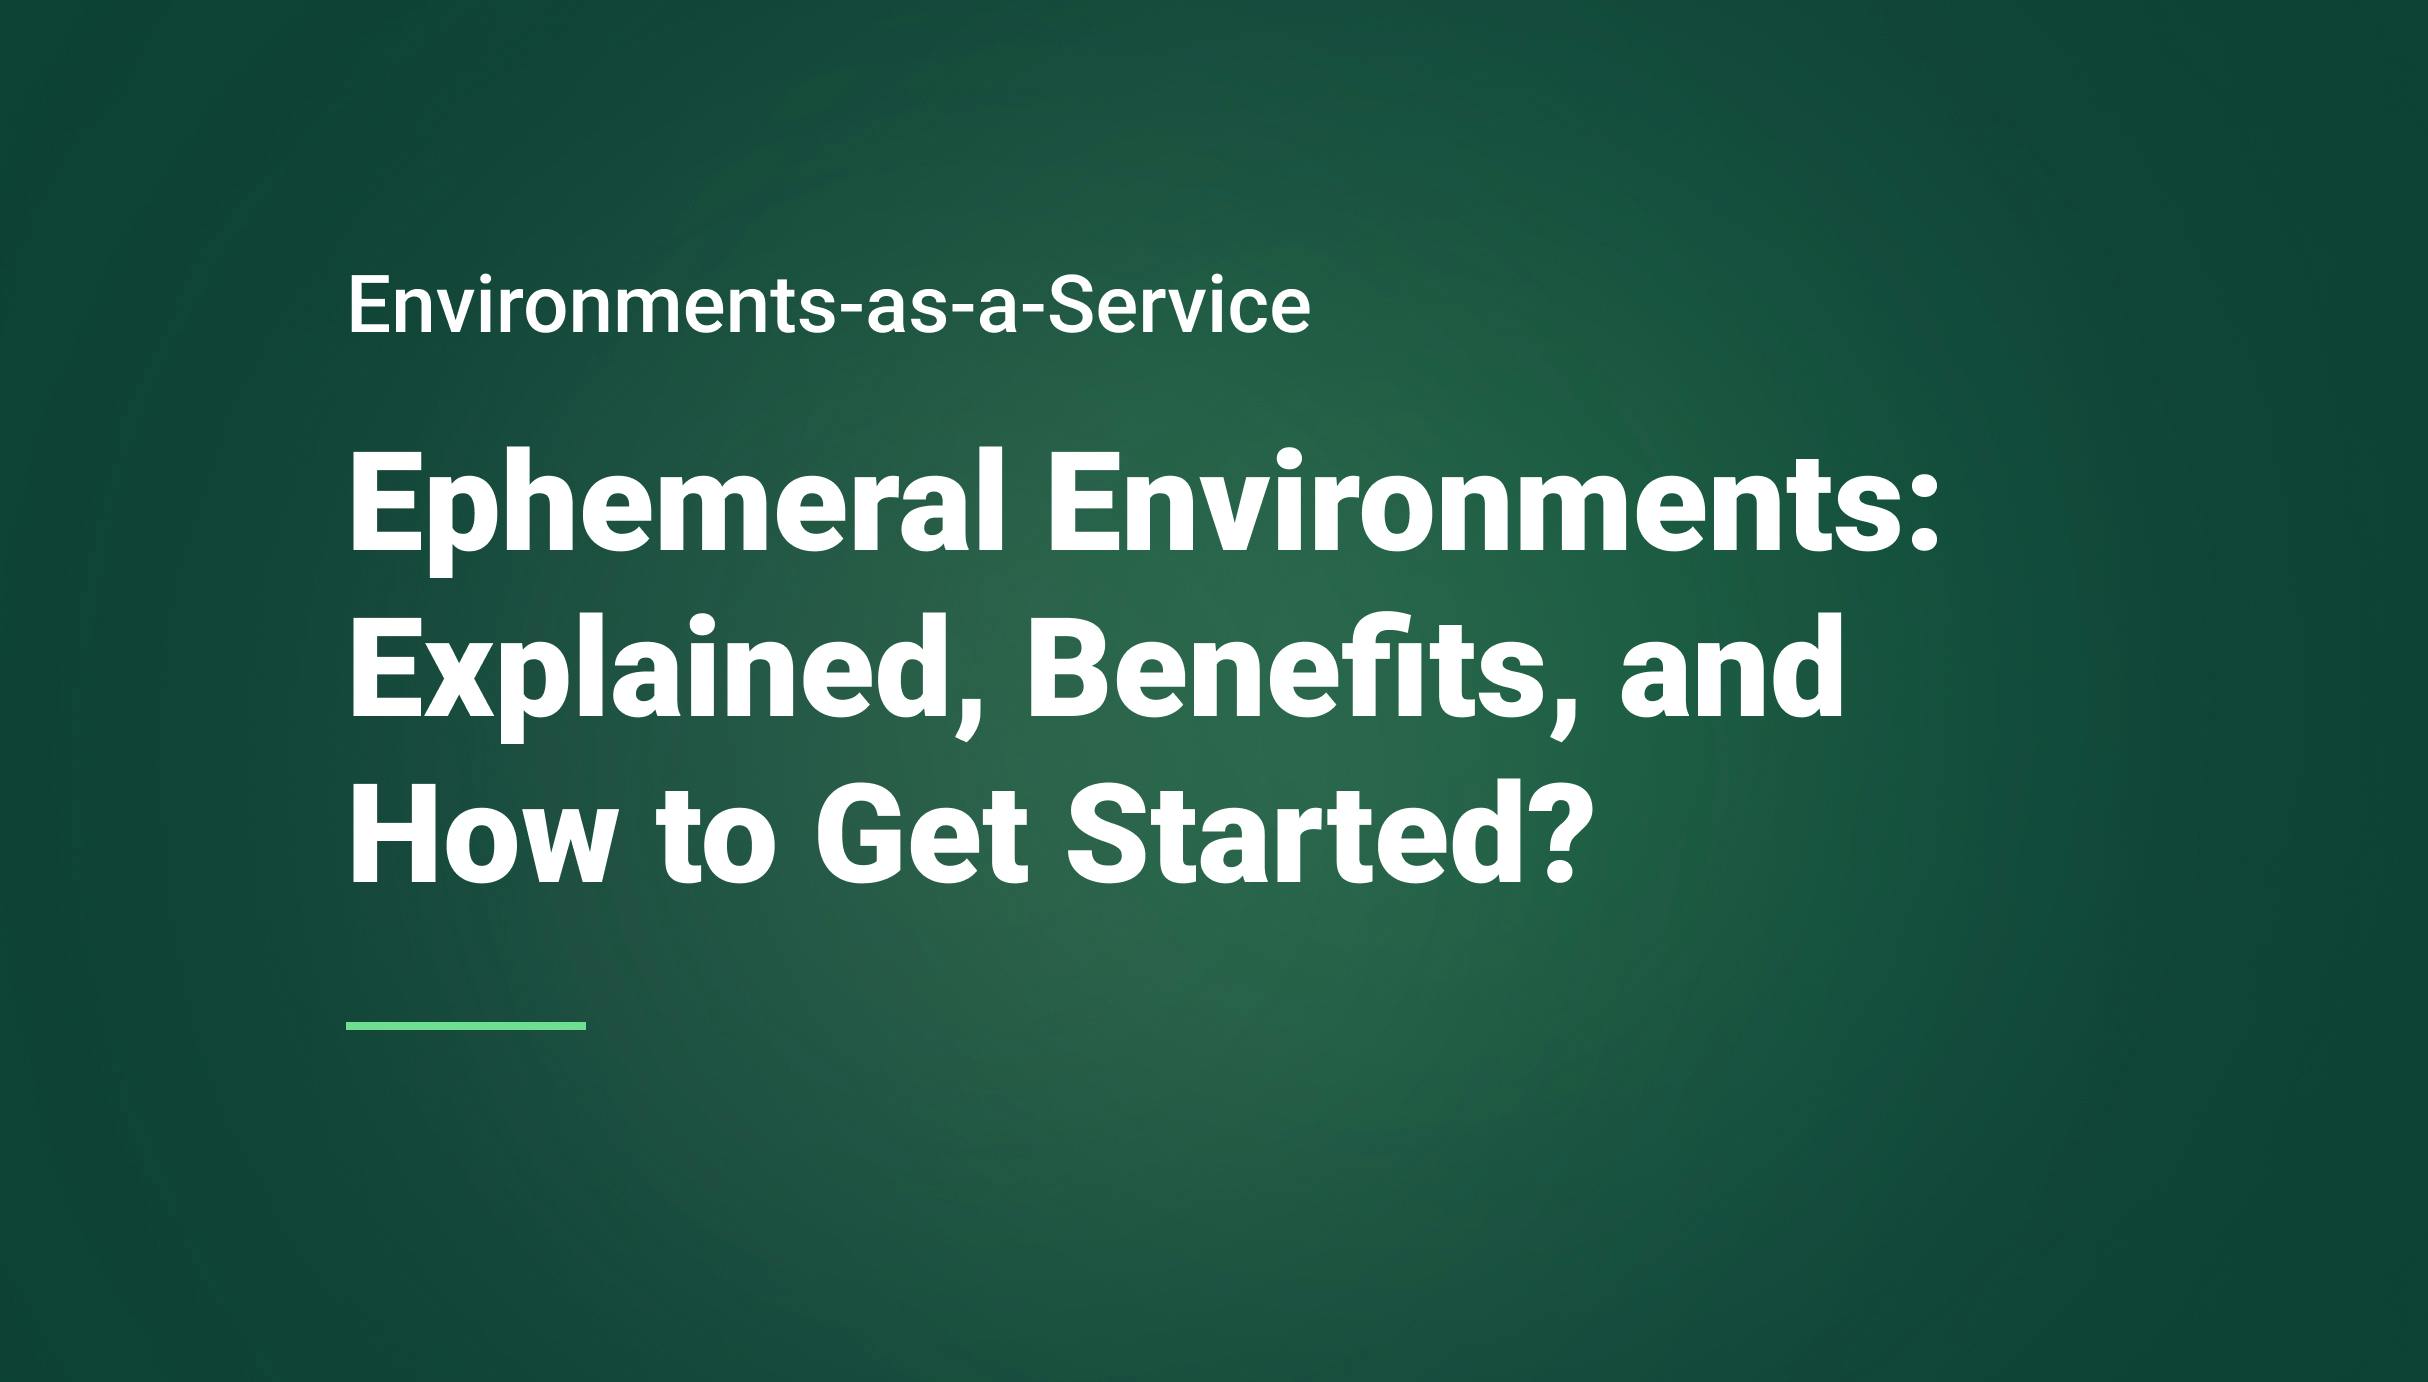 Ephemeral Environments: Explained, Benefits, and How to Get Started? - Qovery